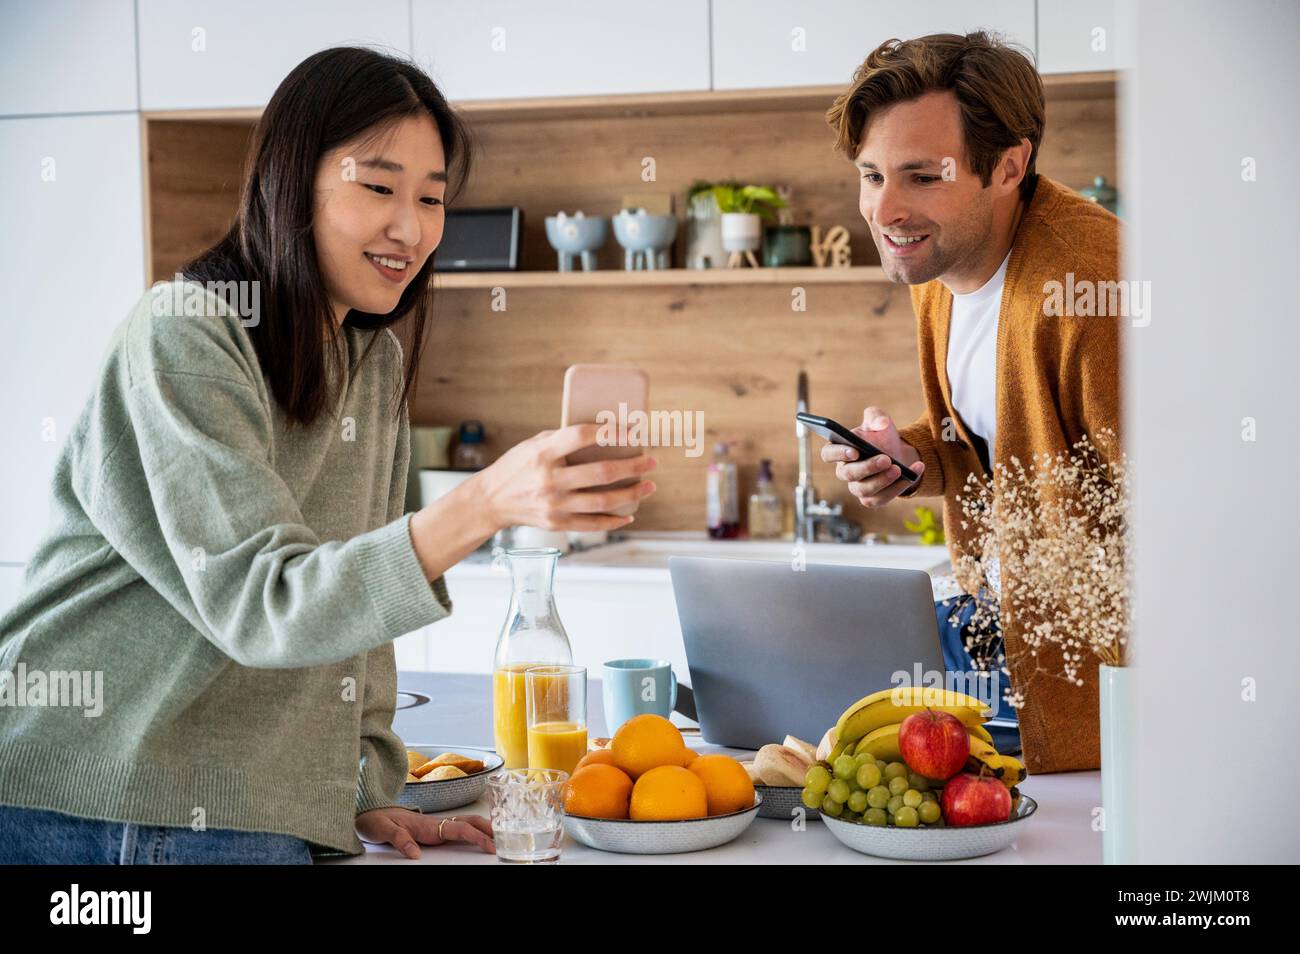 Adult couple talking over smart phone while having breakfast Stock Photo